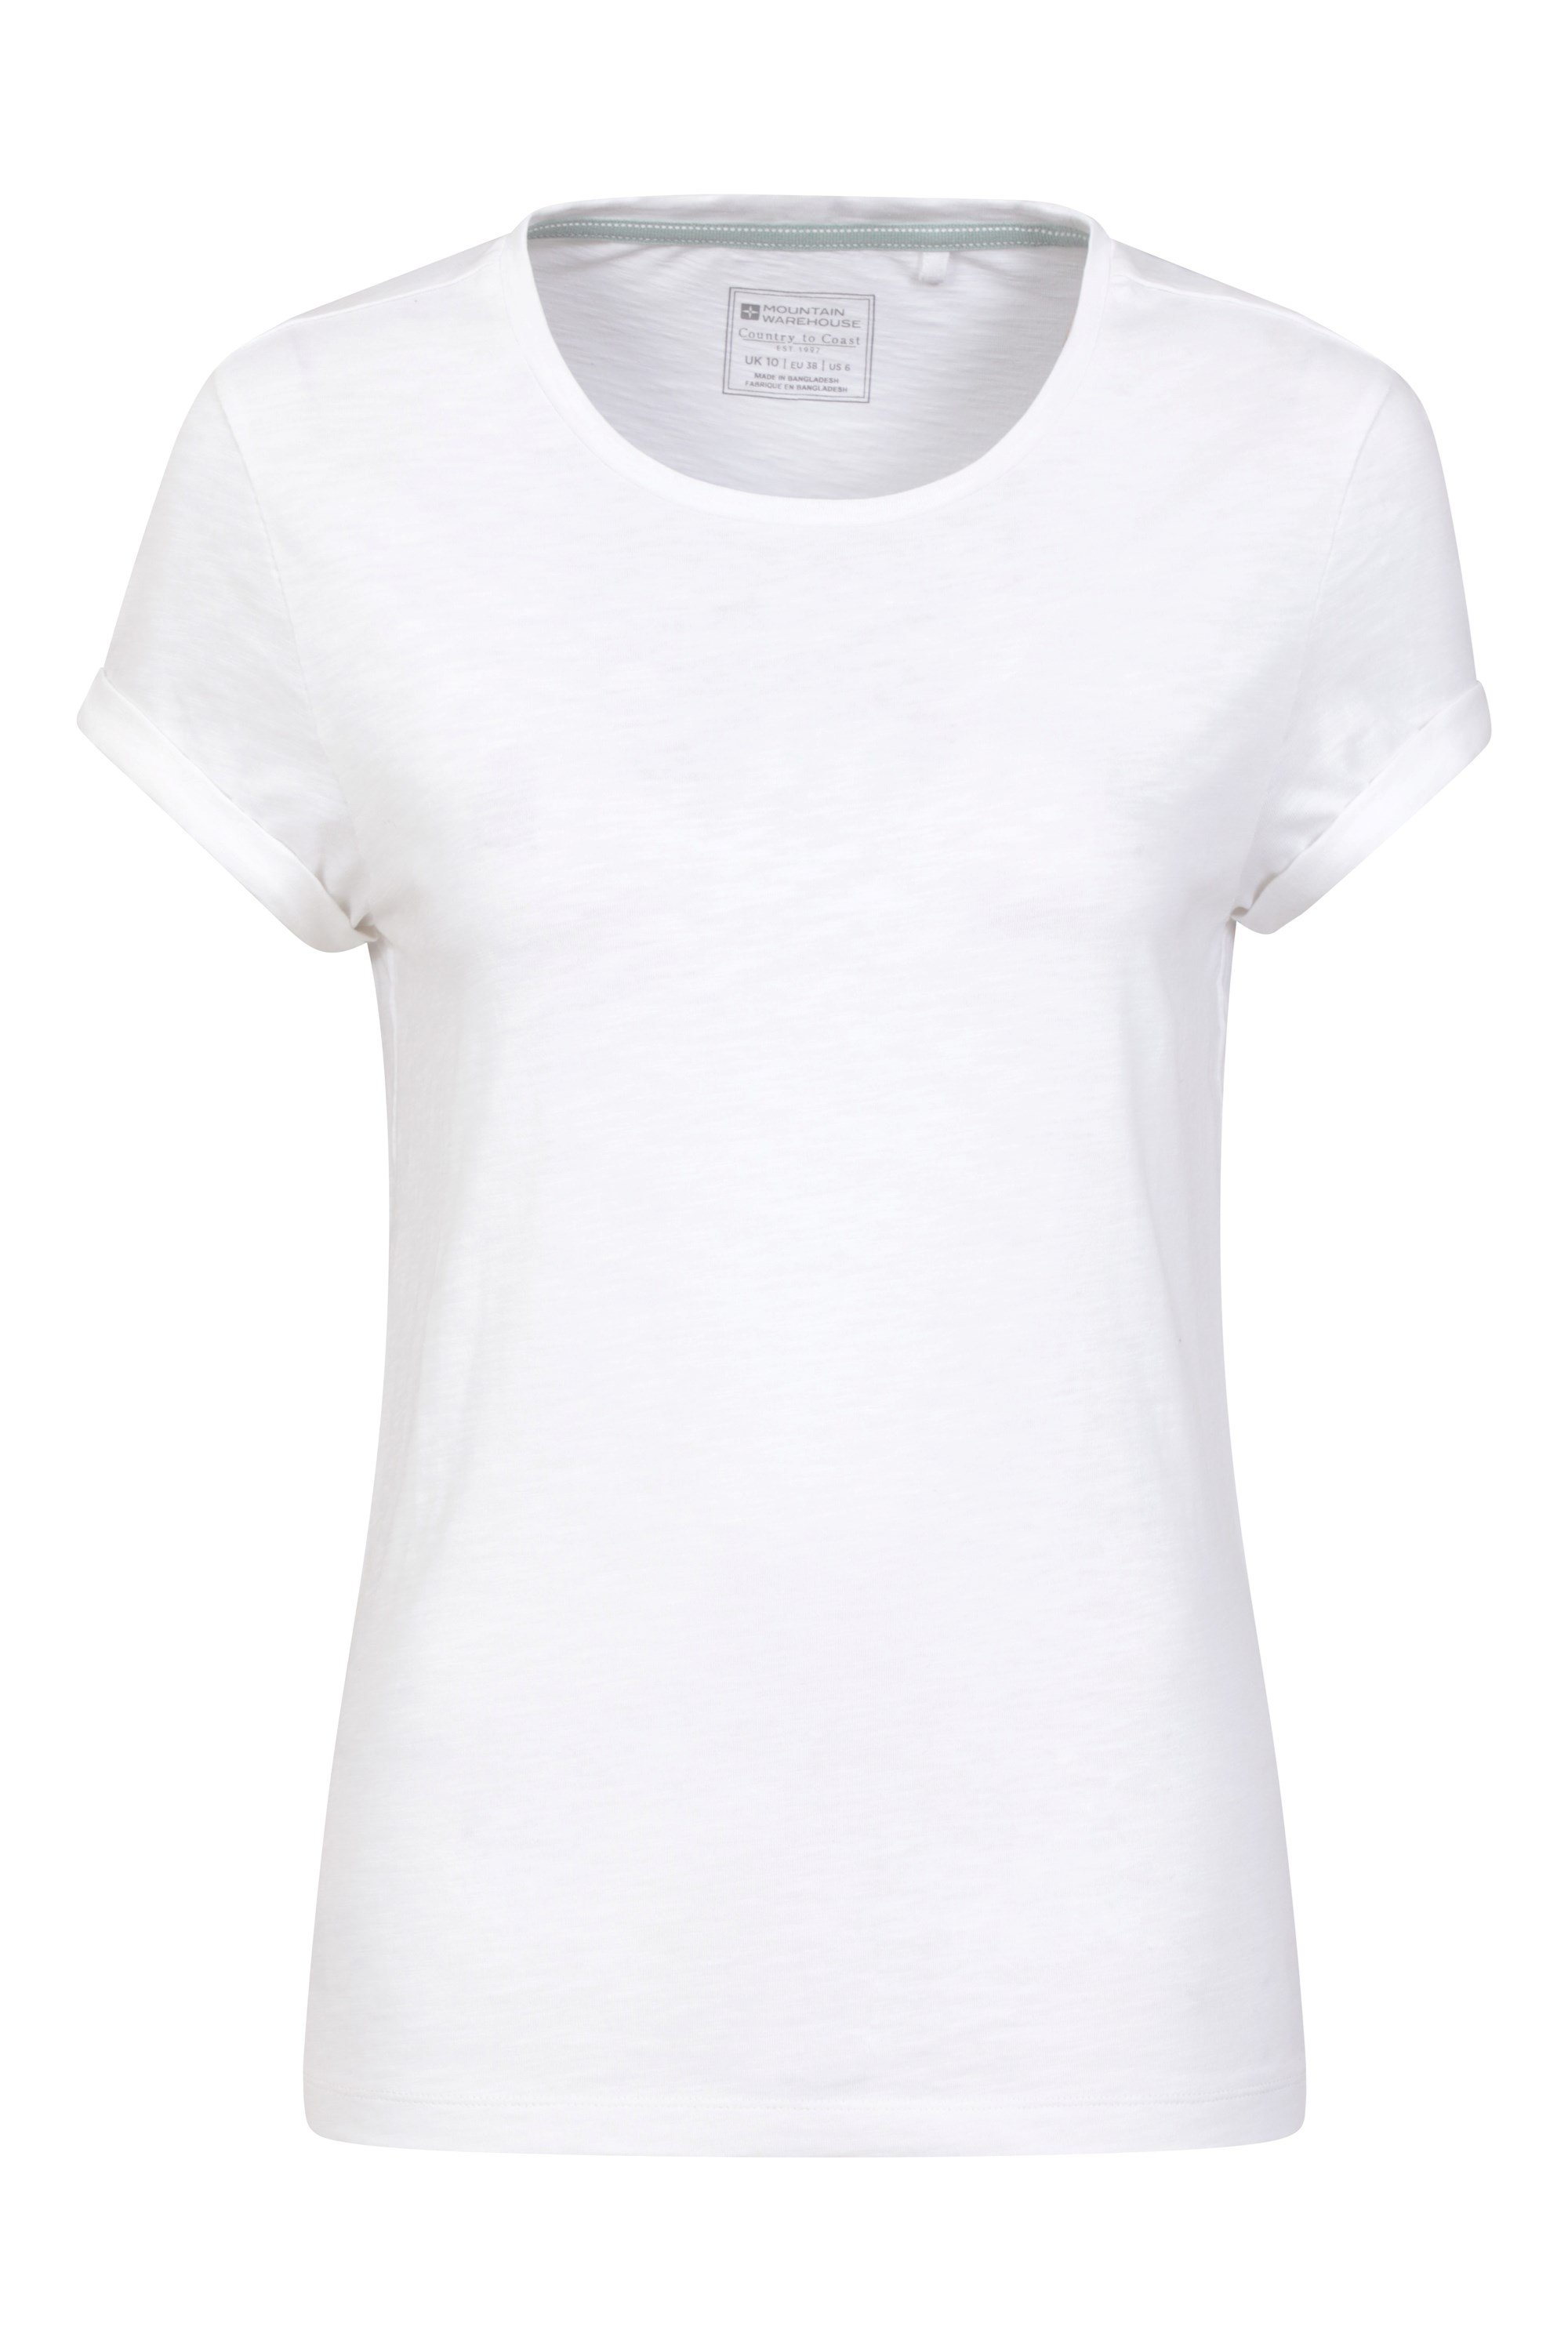 Bude Womens Relaxed Fit T-Shirt White